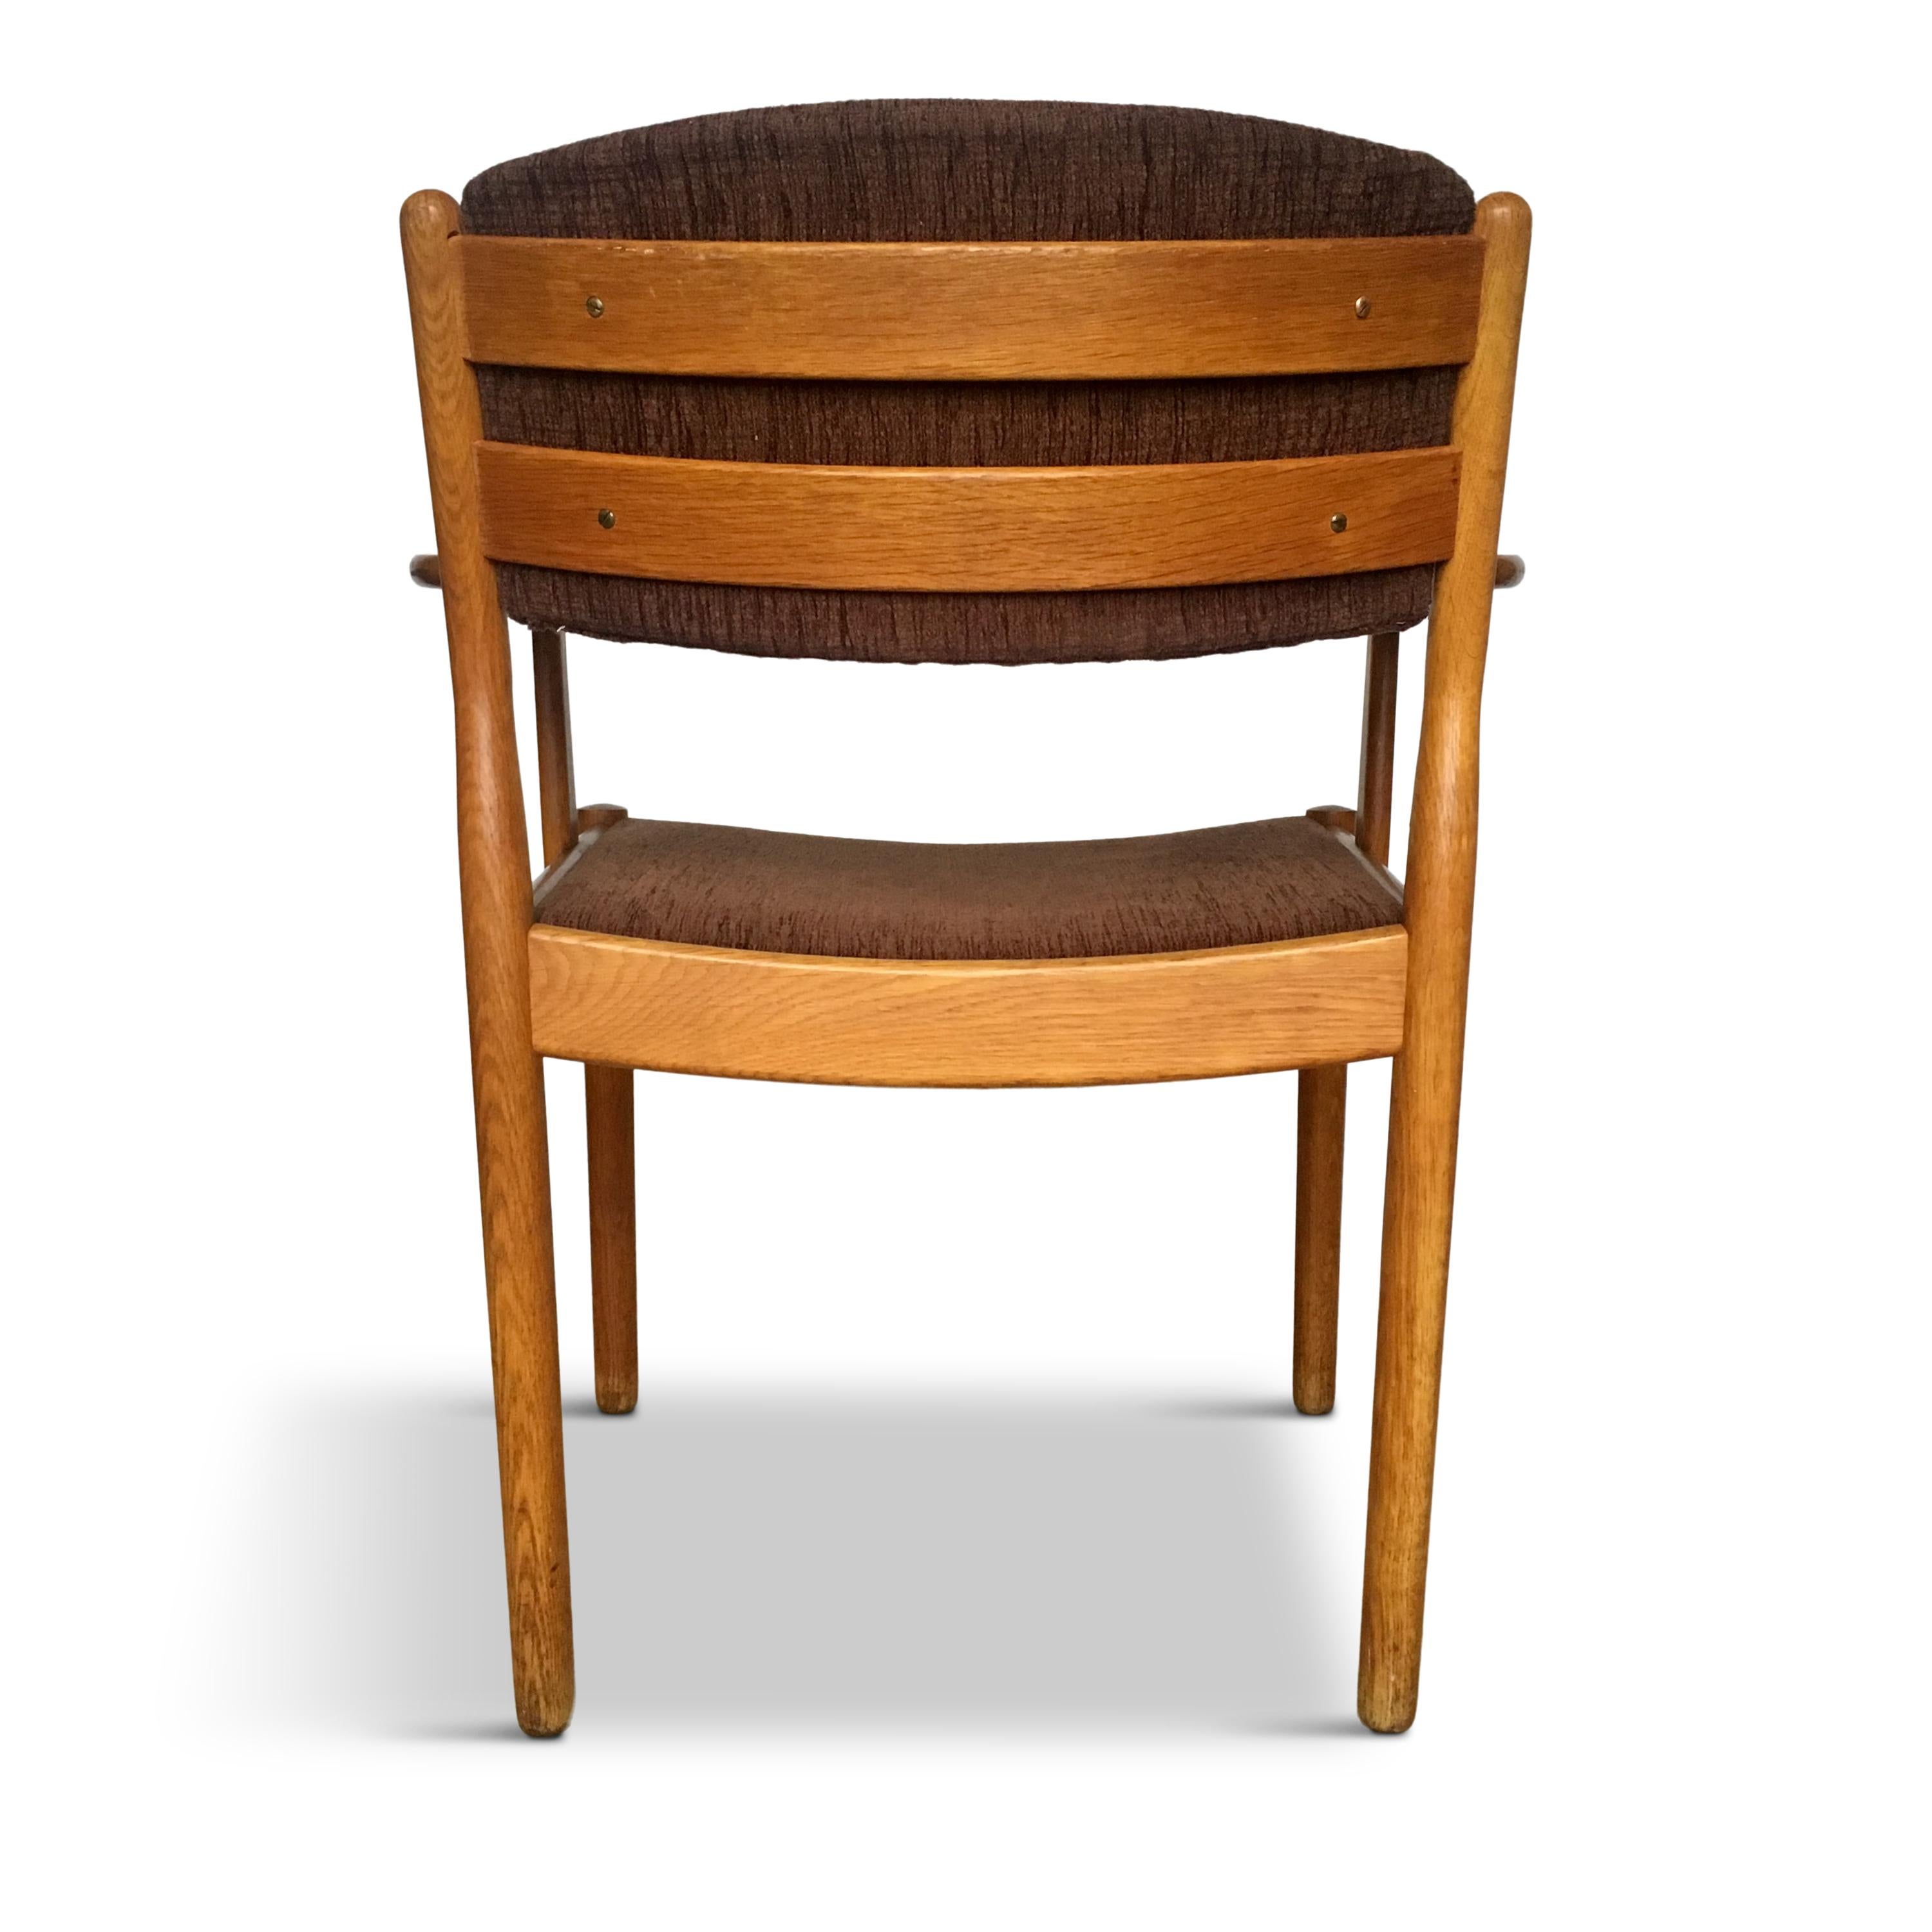 Midcentury Danish Oak Armchair by Poul Volther for FDB Møbler, 1950s im Zustand „Gut“ im Angebot in Riga, Latvia